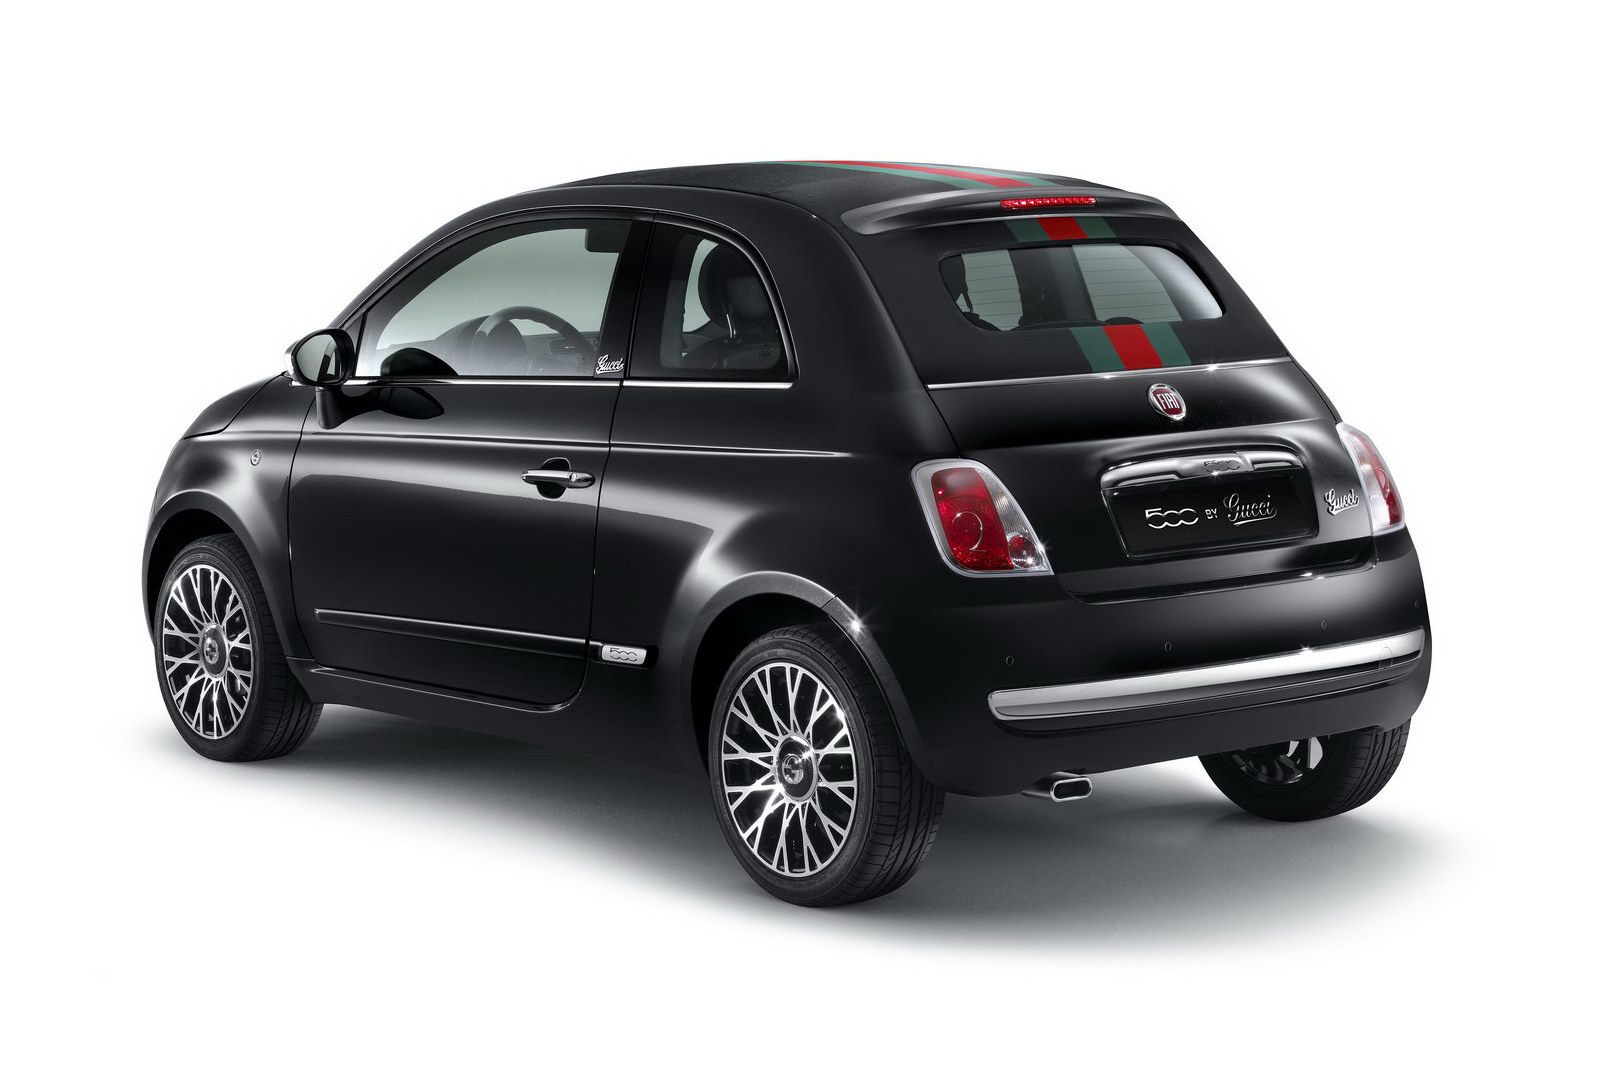 2012 Fiat 500 Cabriolet by Gucci